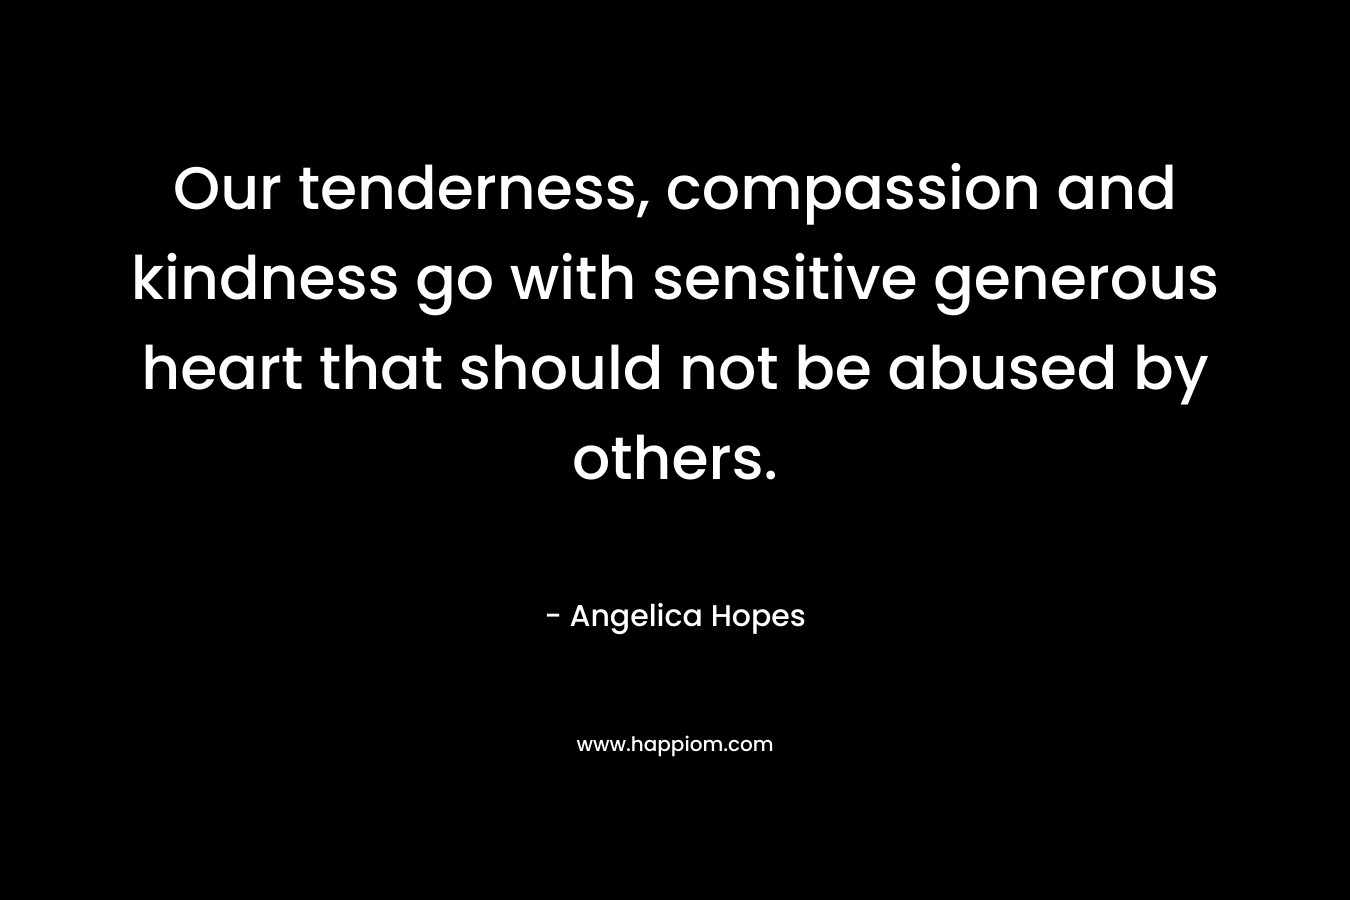 Our tenderness, compassion and kindness go with sensitive generous heart that should not be abused by others.